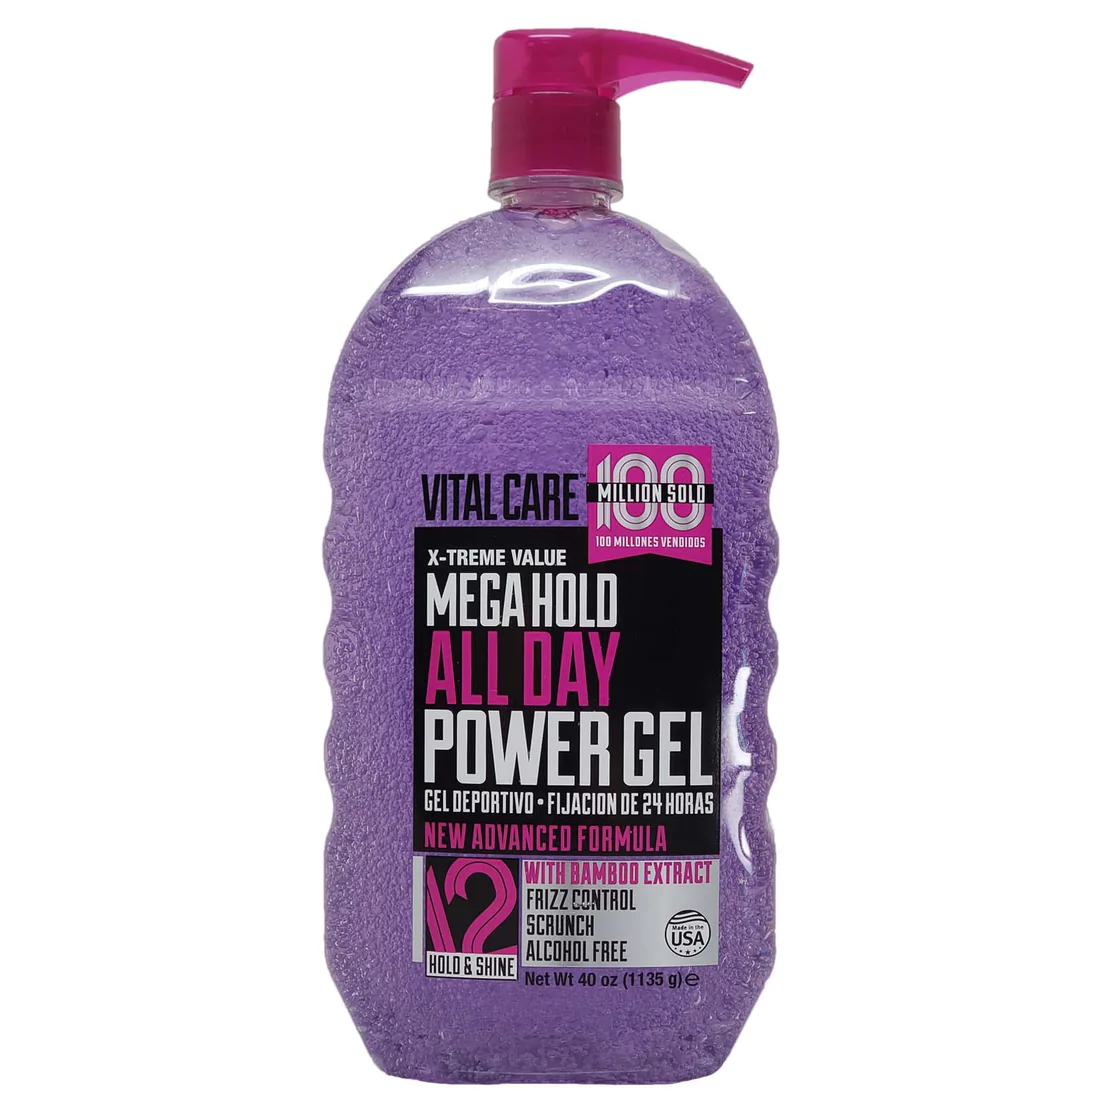 Vital Care Mega Hold All Day Power Gel with Pump Maximum control 40oz